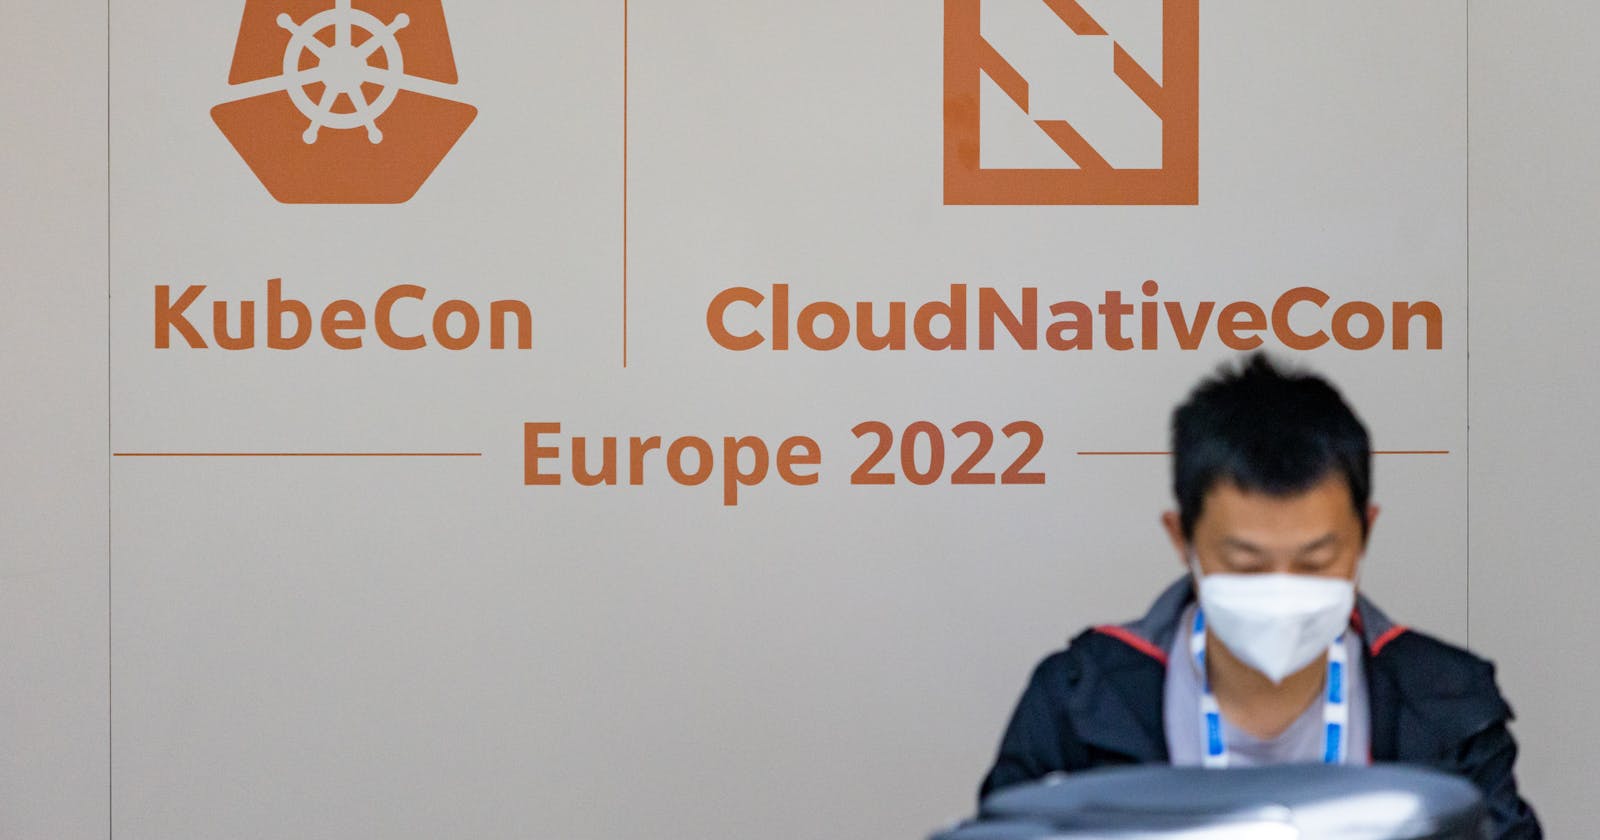 The Story Of My First KubeCon + CloudNativeCon